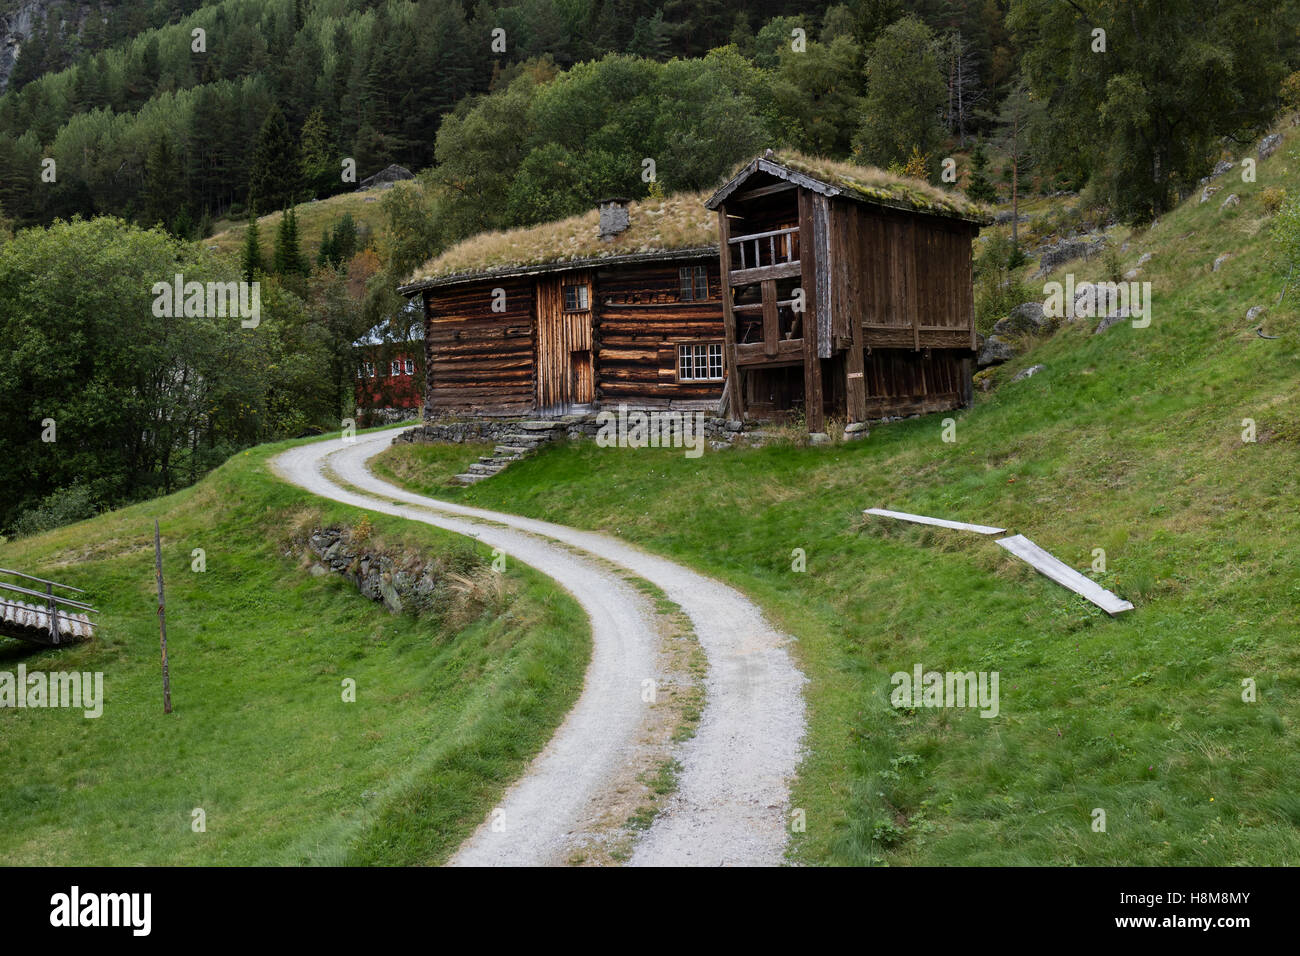 Farm house from the 16th century at Rygnestadtunet in the Setesdal, Norway Stock Photo